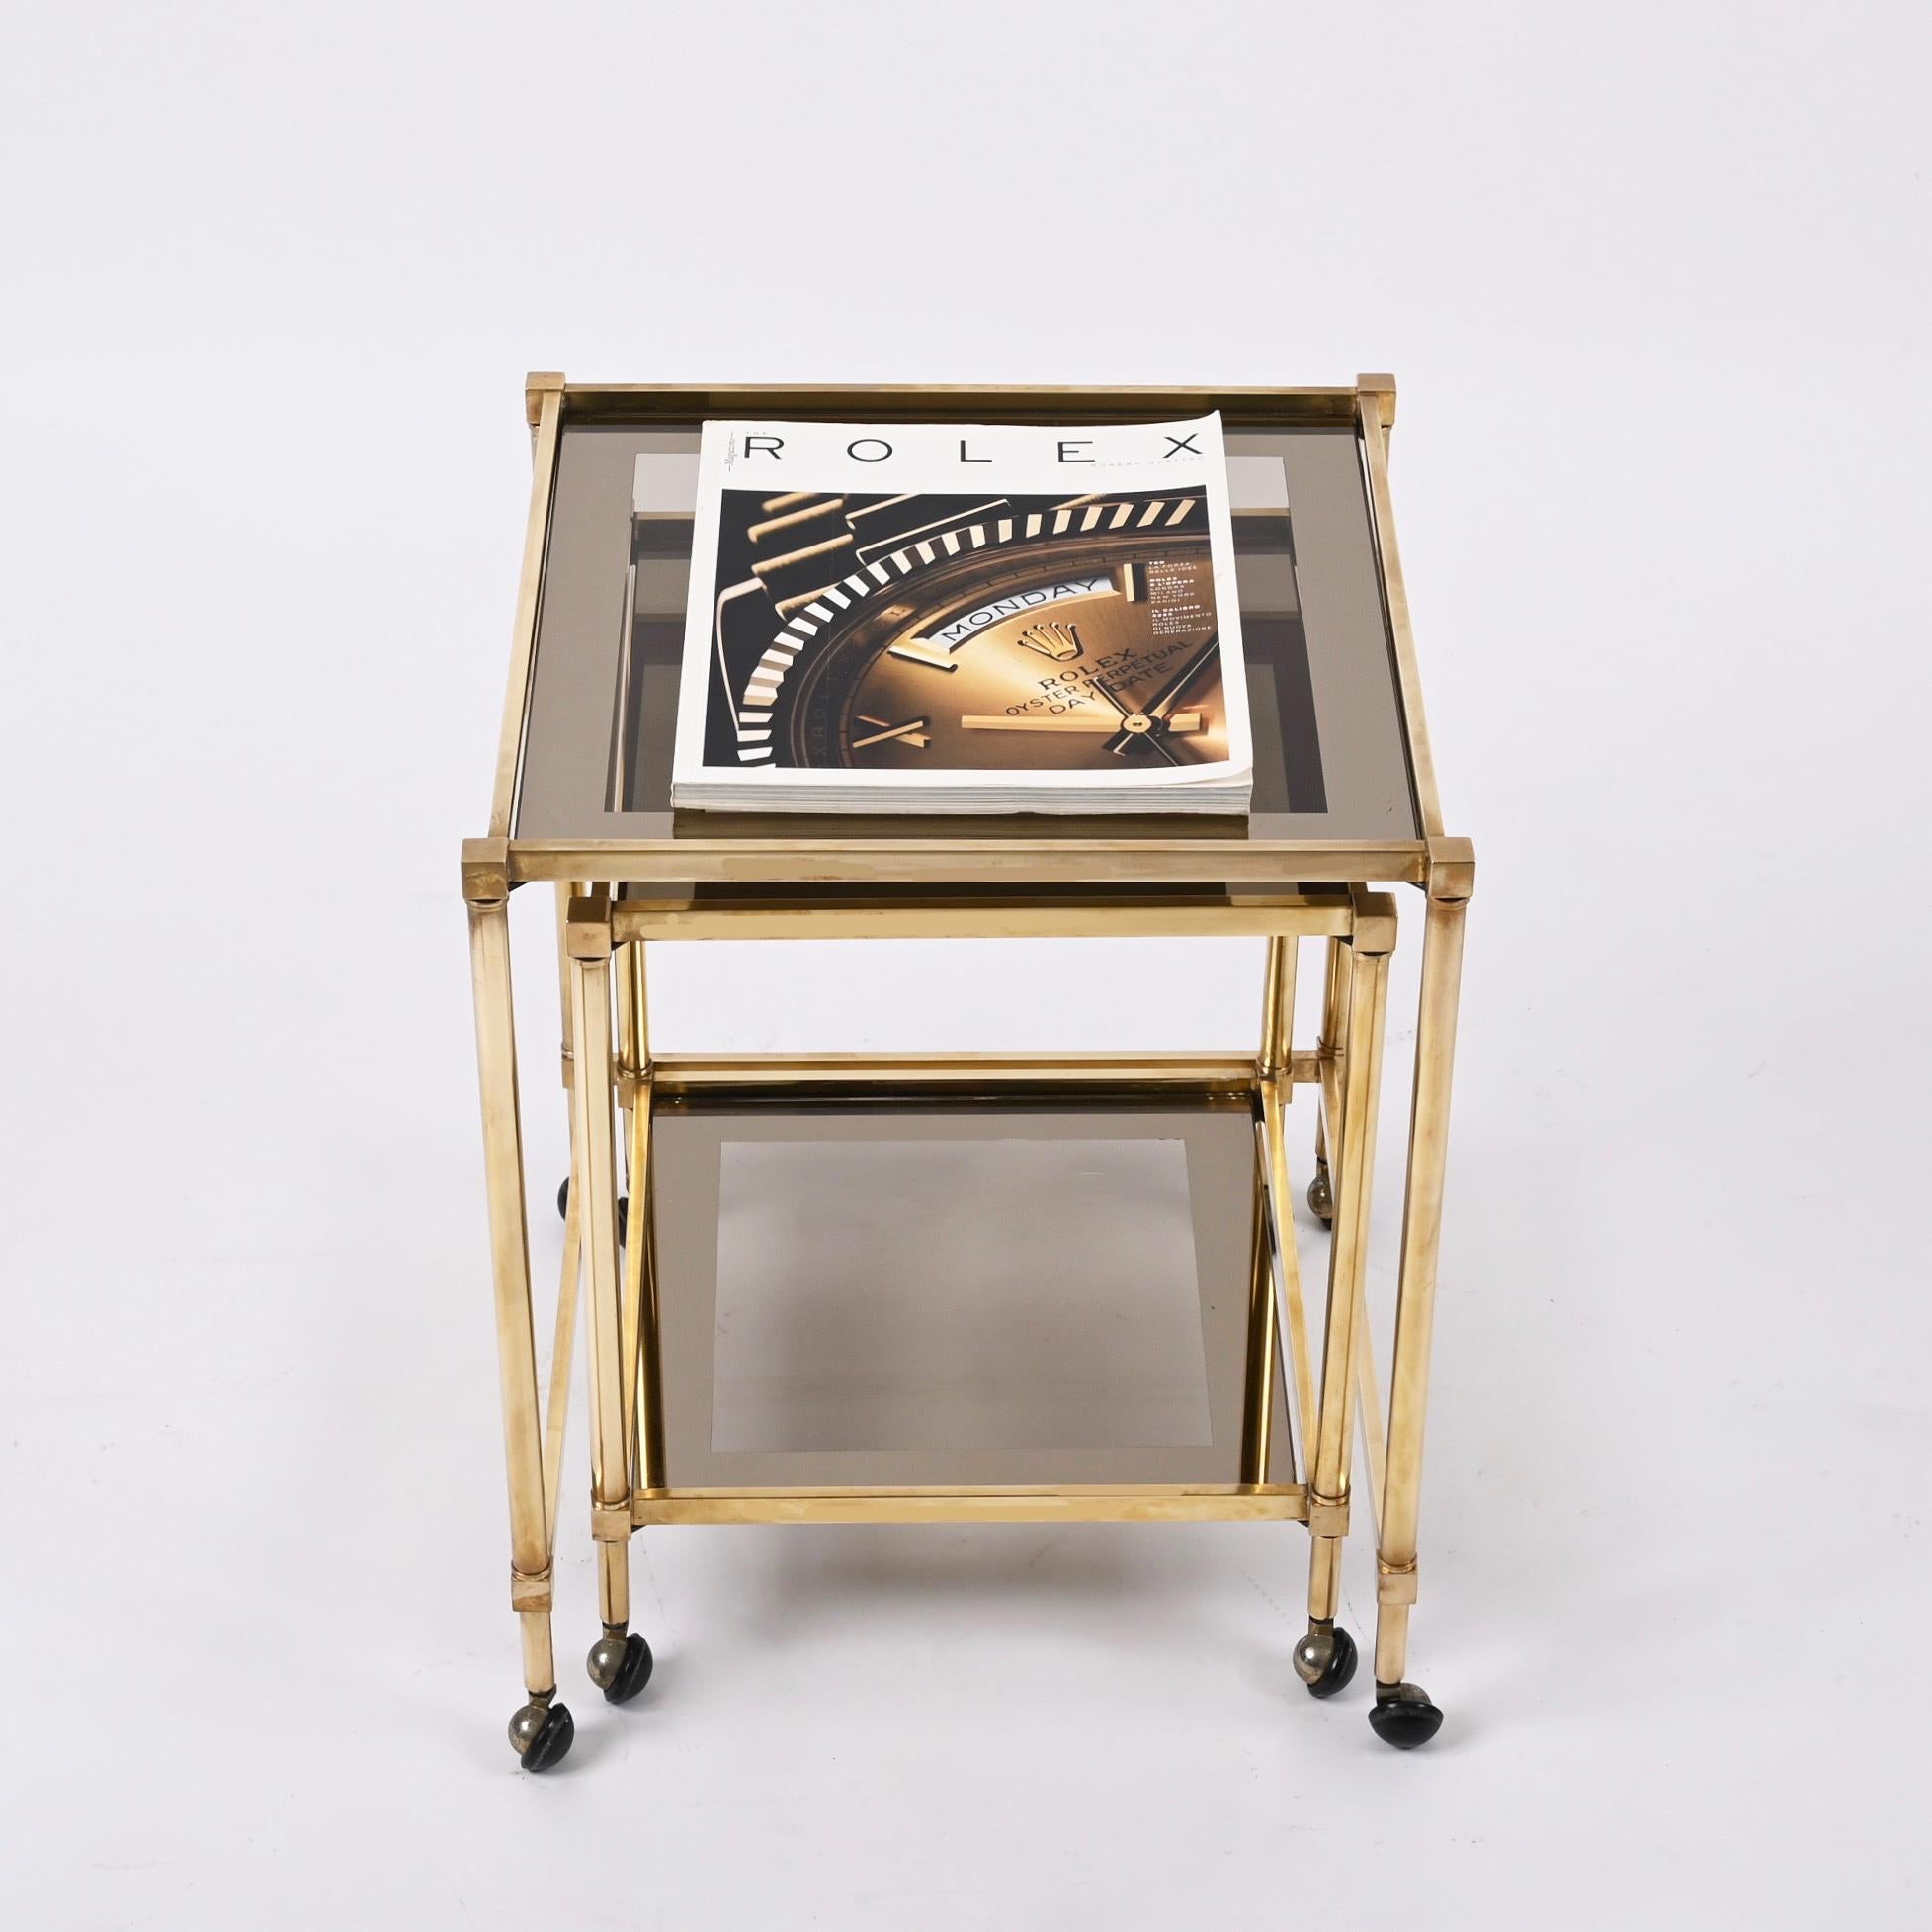 Pair of Maison Jansen Brass Mirrored Border Nesting Tables with Glass Top, 1970s For Sale 2